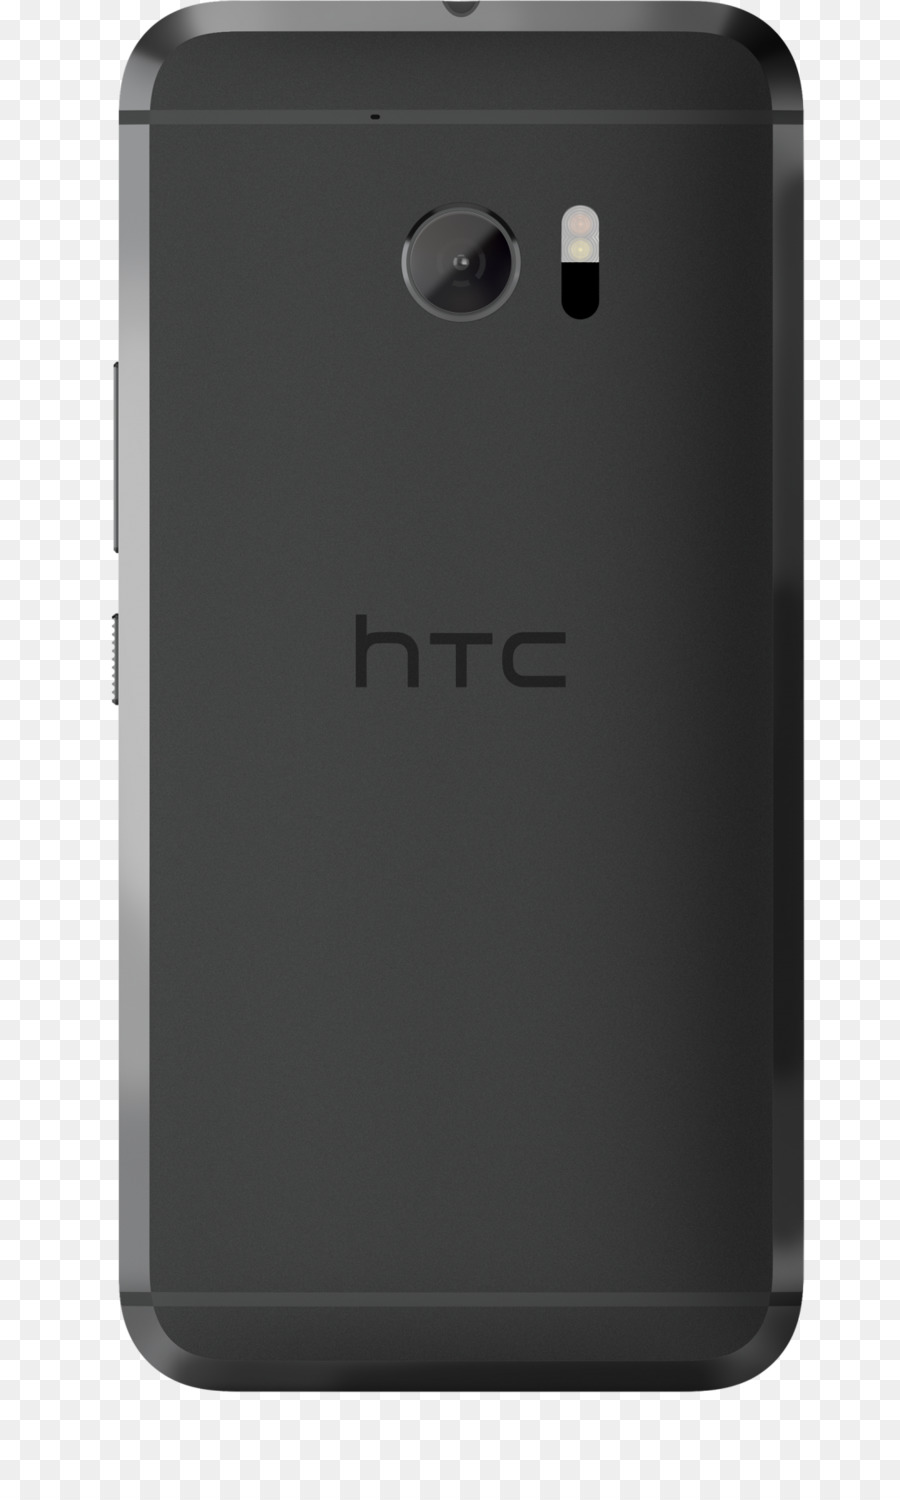 Wesentliche Phone HTC Android iPhone Smartphone - Android